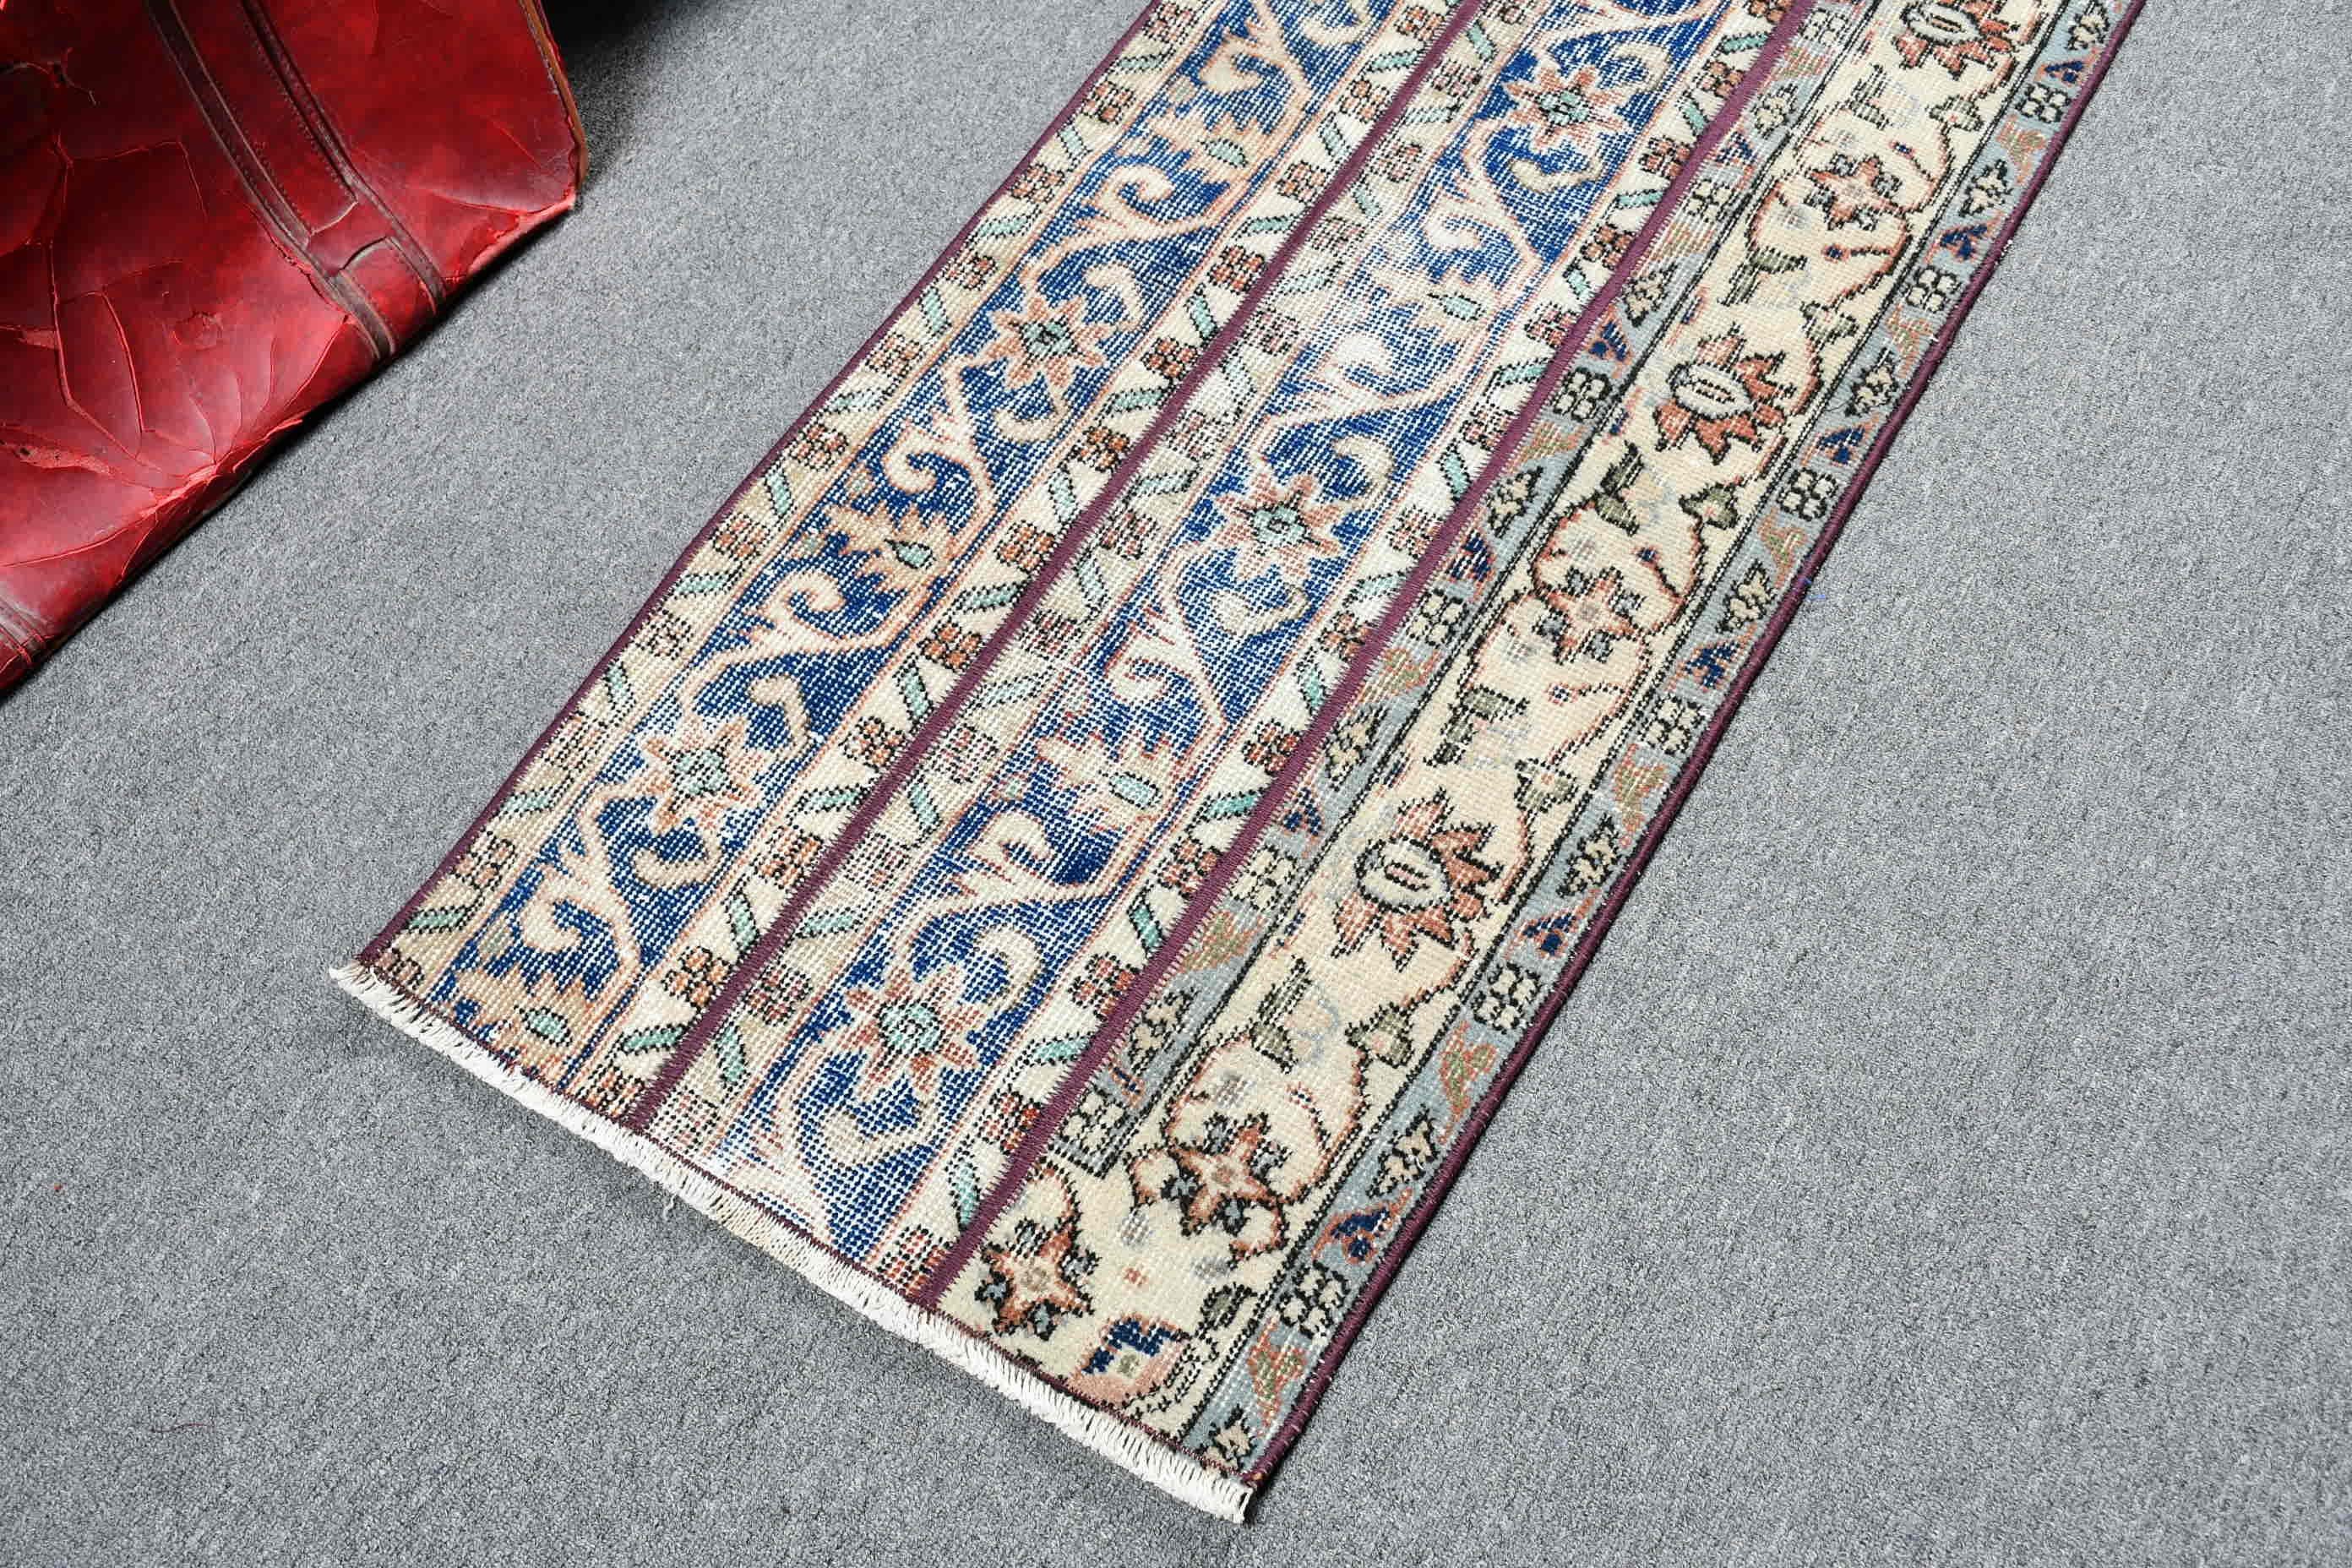 Rugs for Entry, Blue Bedroom Rug, Cute Bath Mat Rugs, 1.8x5 ft Small Rug, Vintage Rug, Antique Rug, Kitchen Rugs, Entry Rug, Turkish Rug